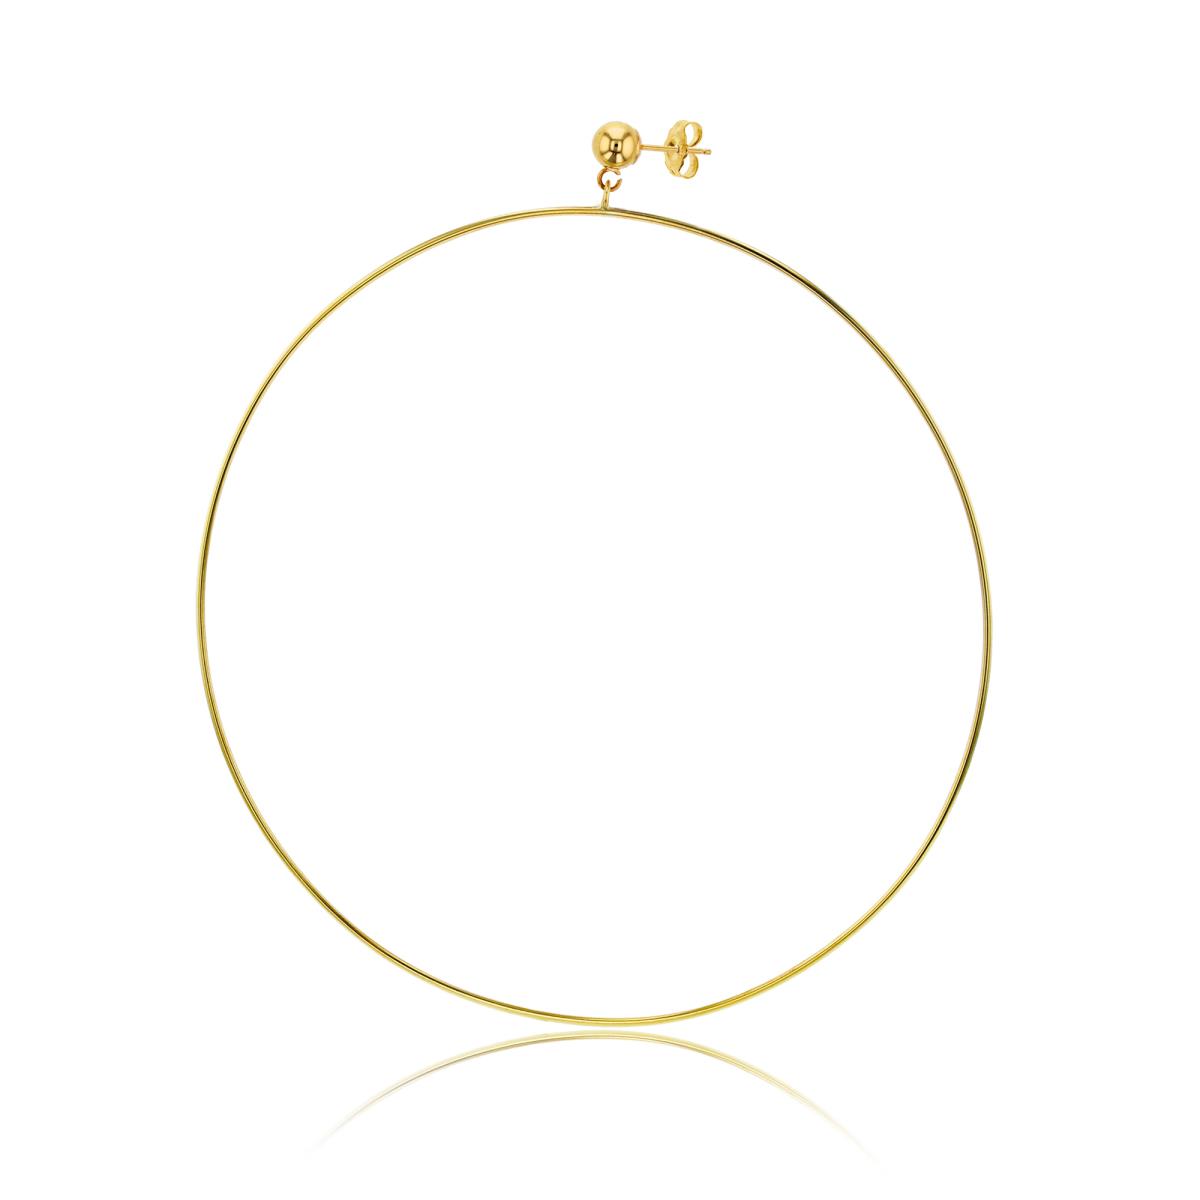 14K Yellow Gold 5mm Polished Ball Stud with 90x1.25mm Hoop Dangling Earrings with Clutch